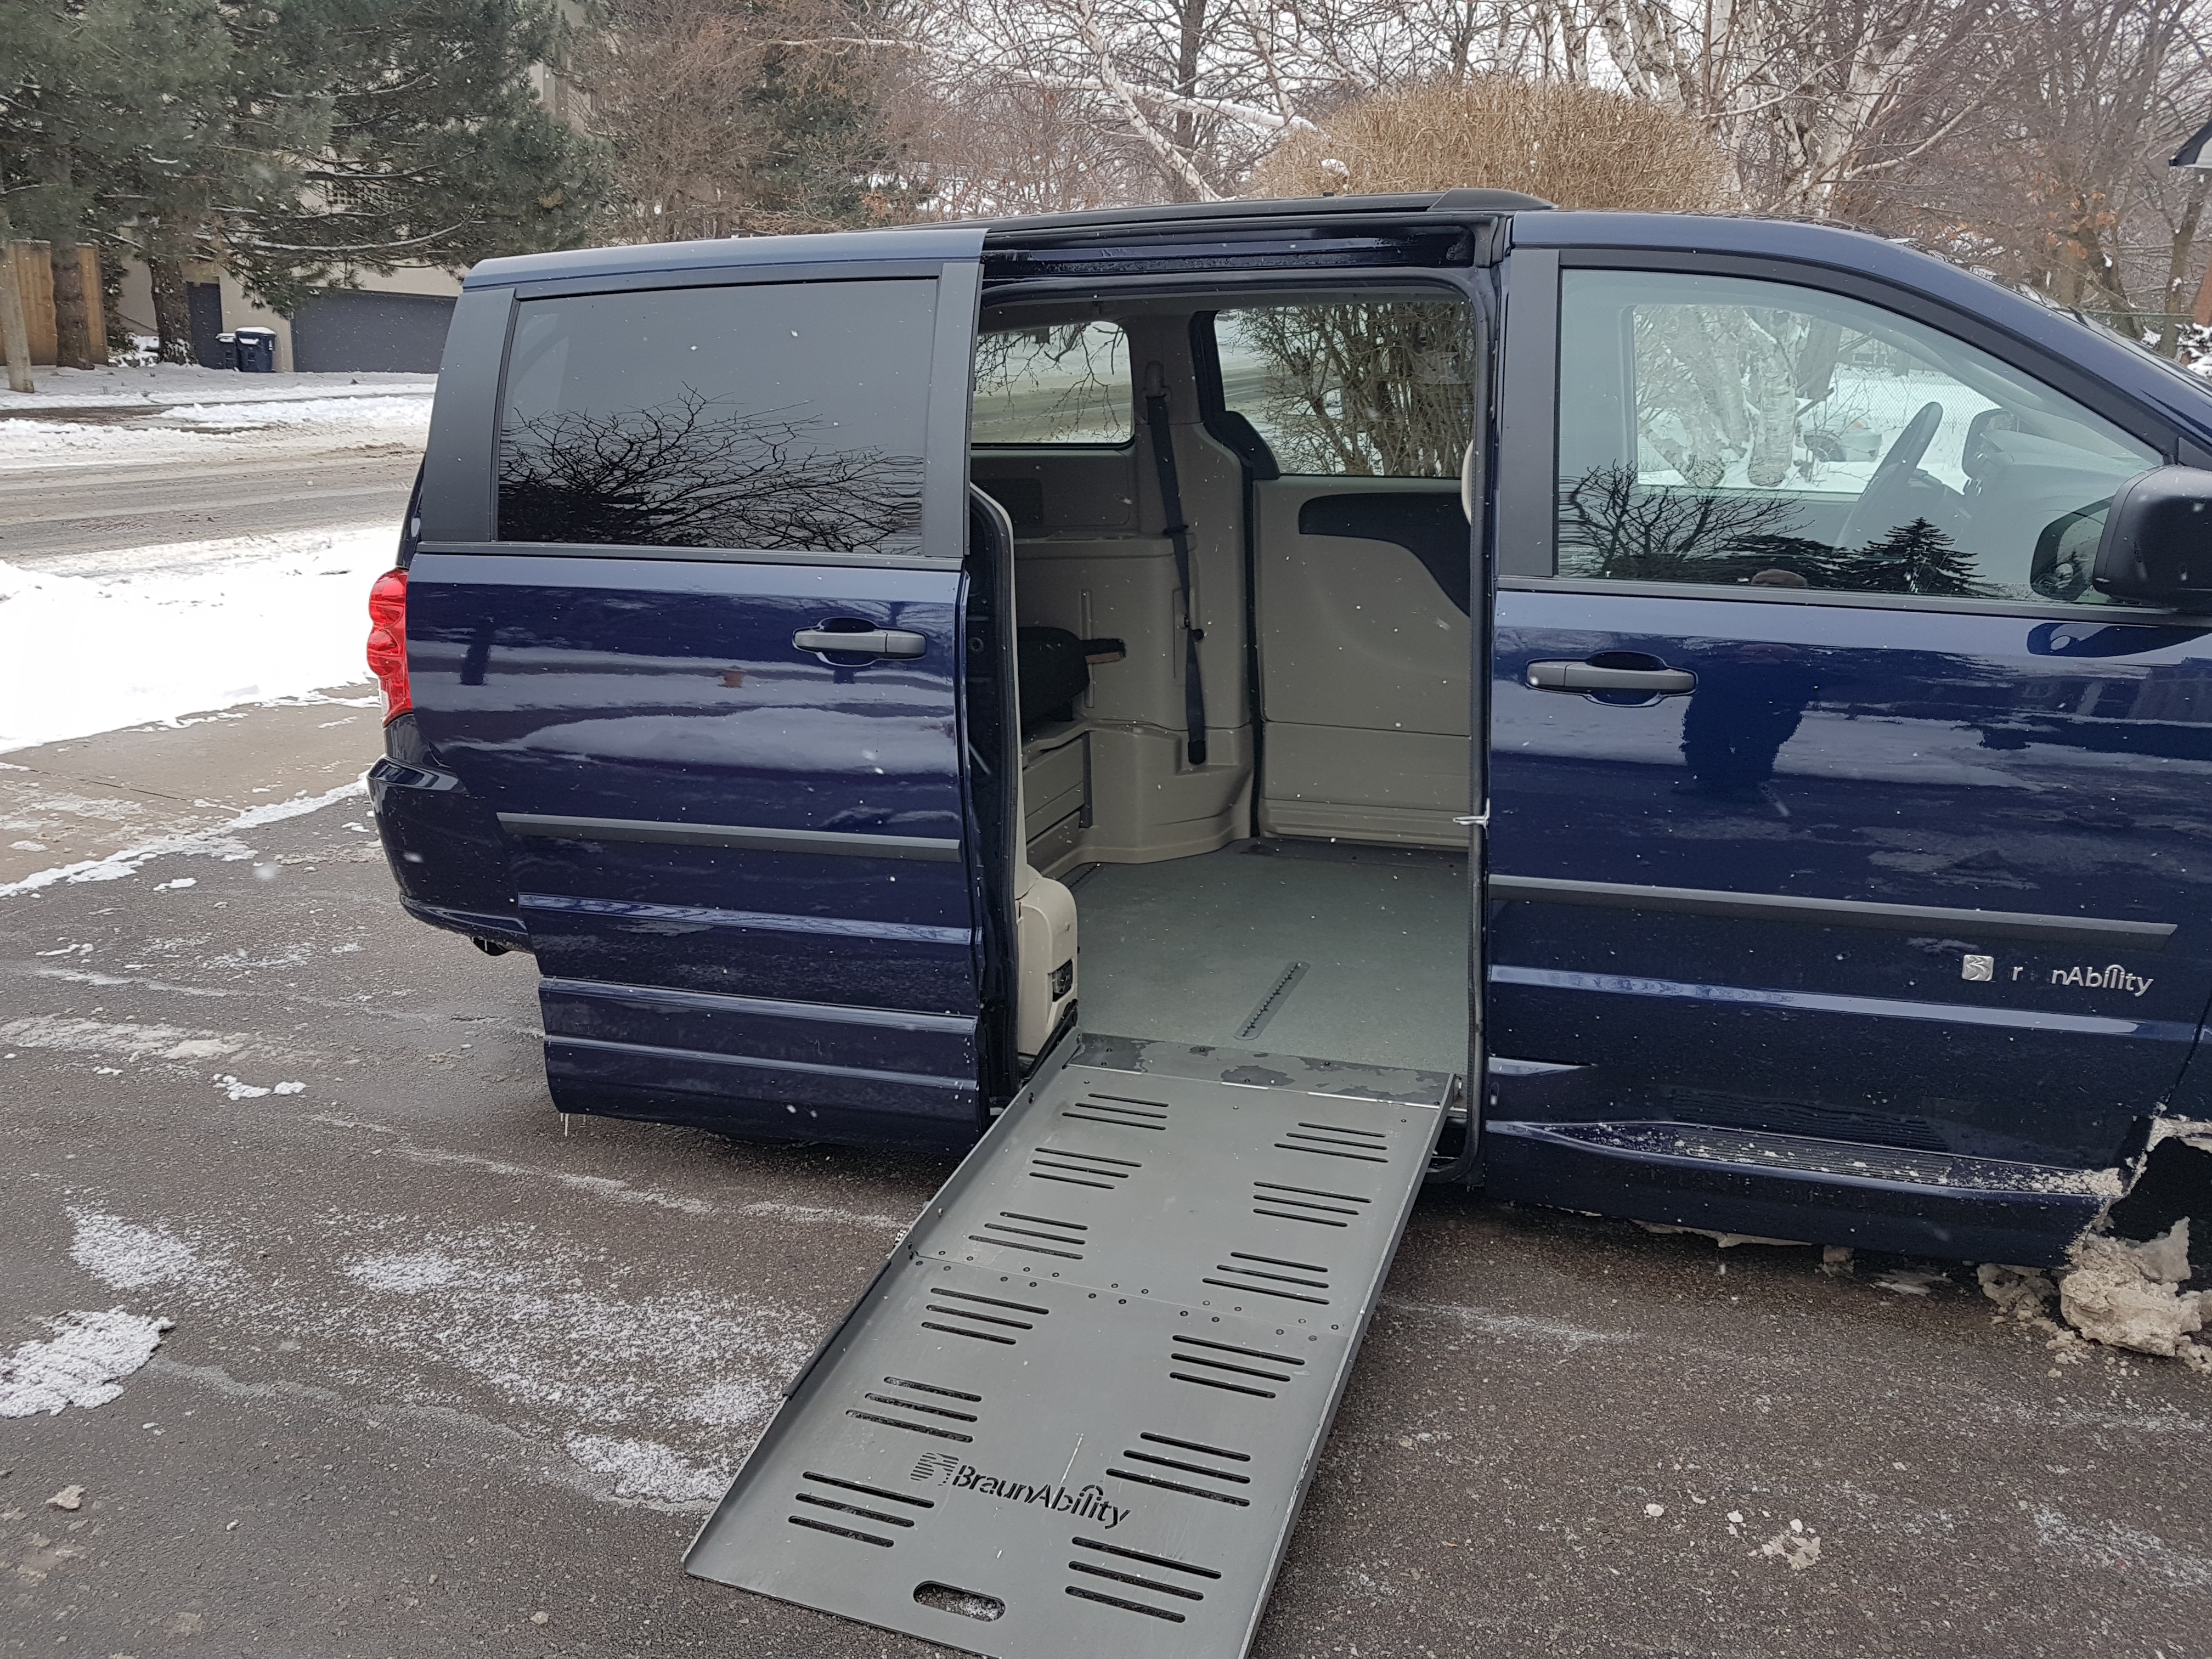 wheelchair accessible vehicles